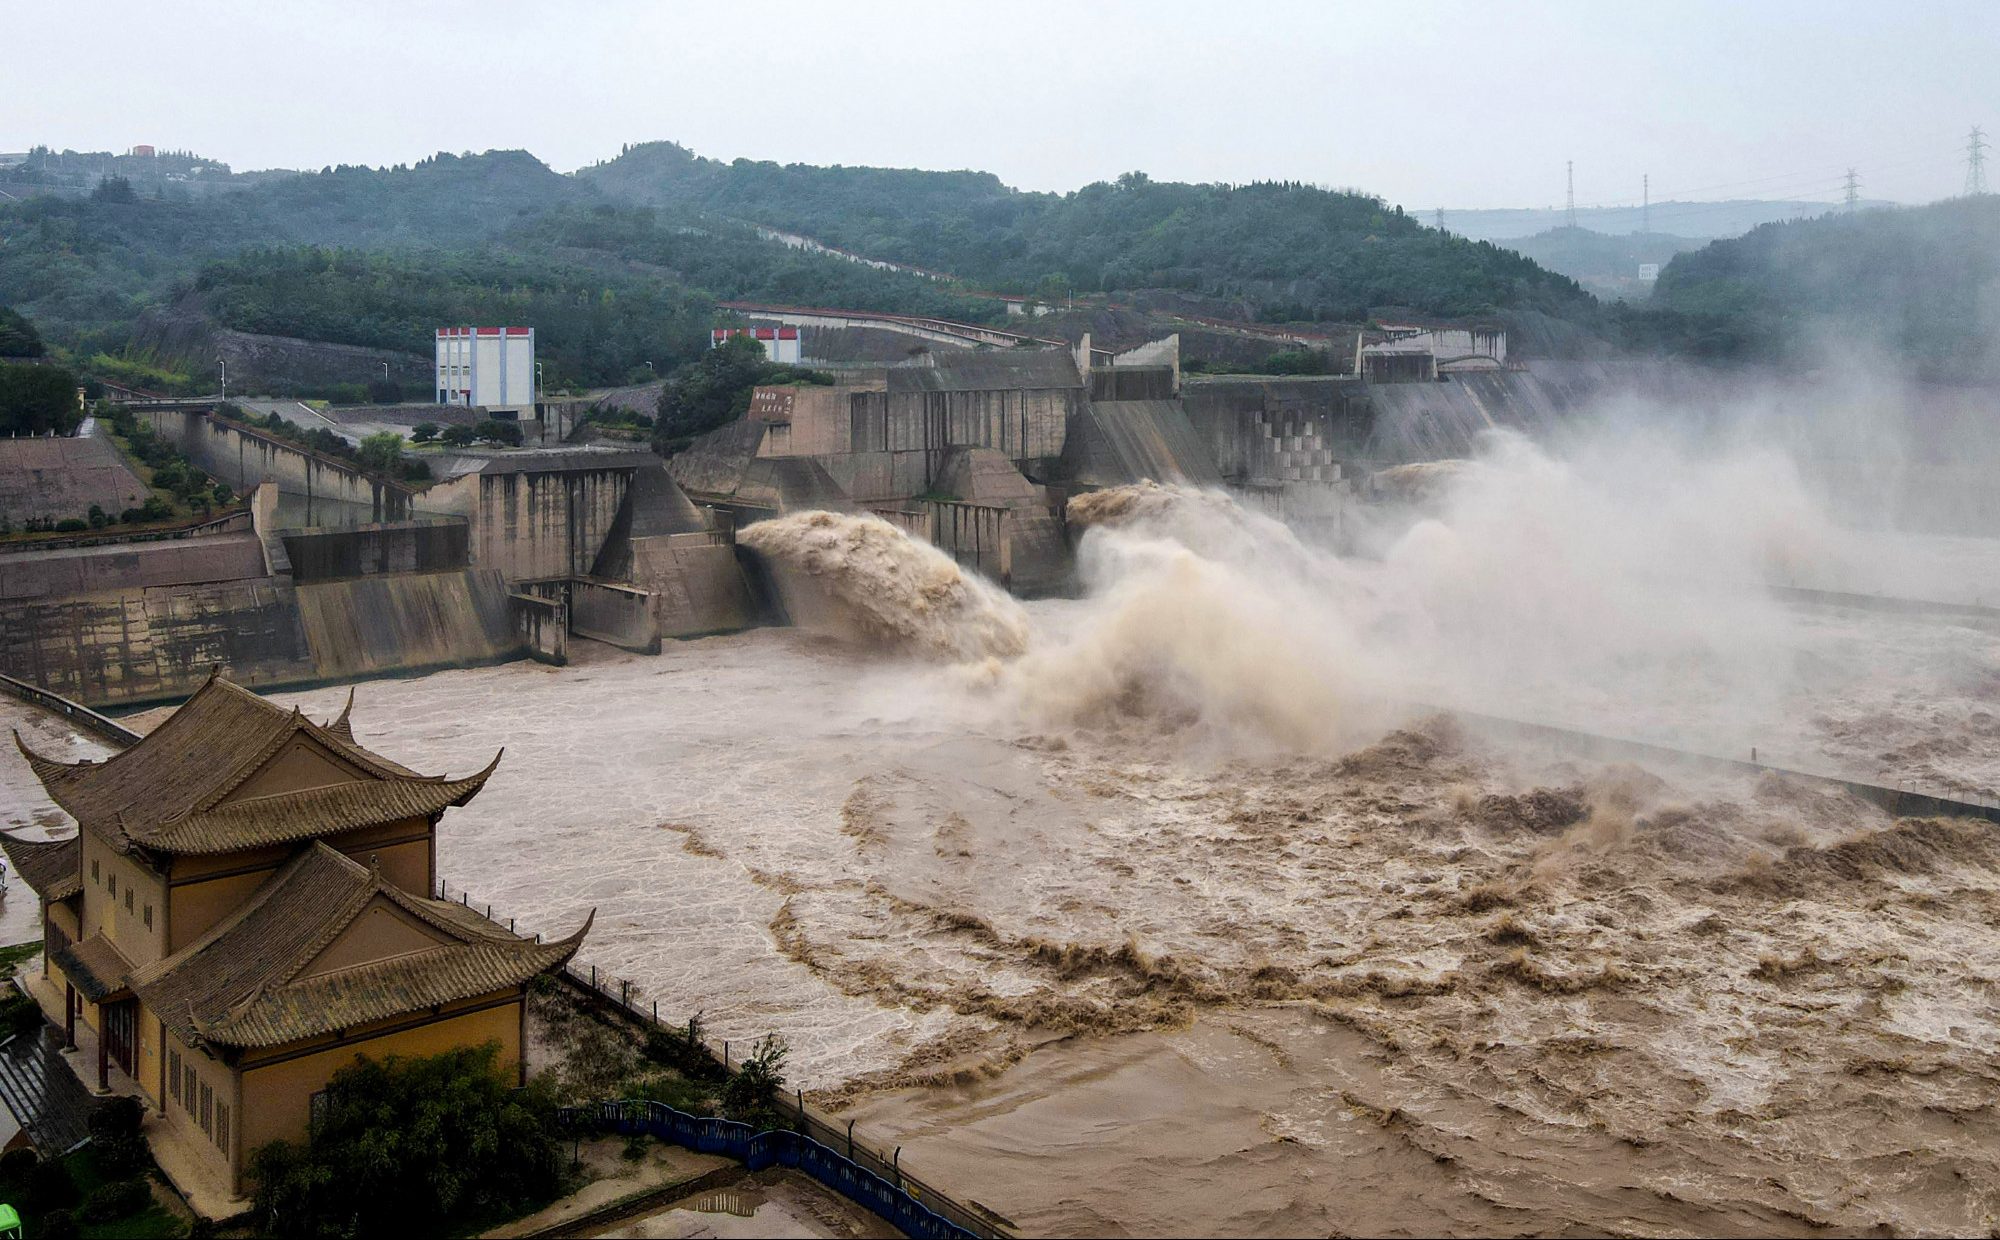 China In Focus (Aug. 7): Third Wave of Flooding Forms in the Yellow River